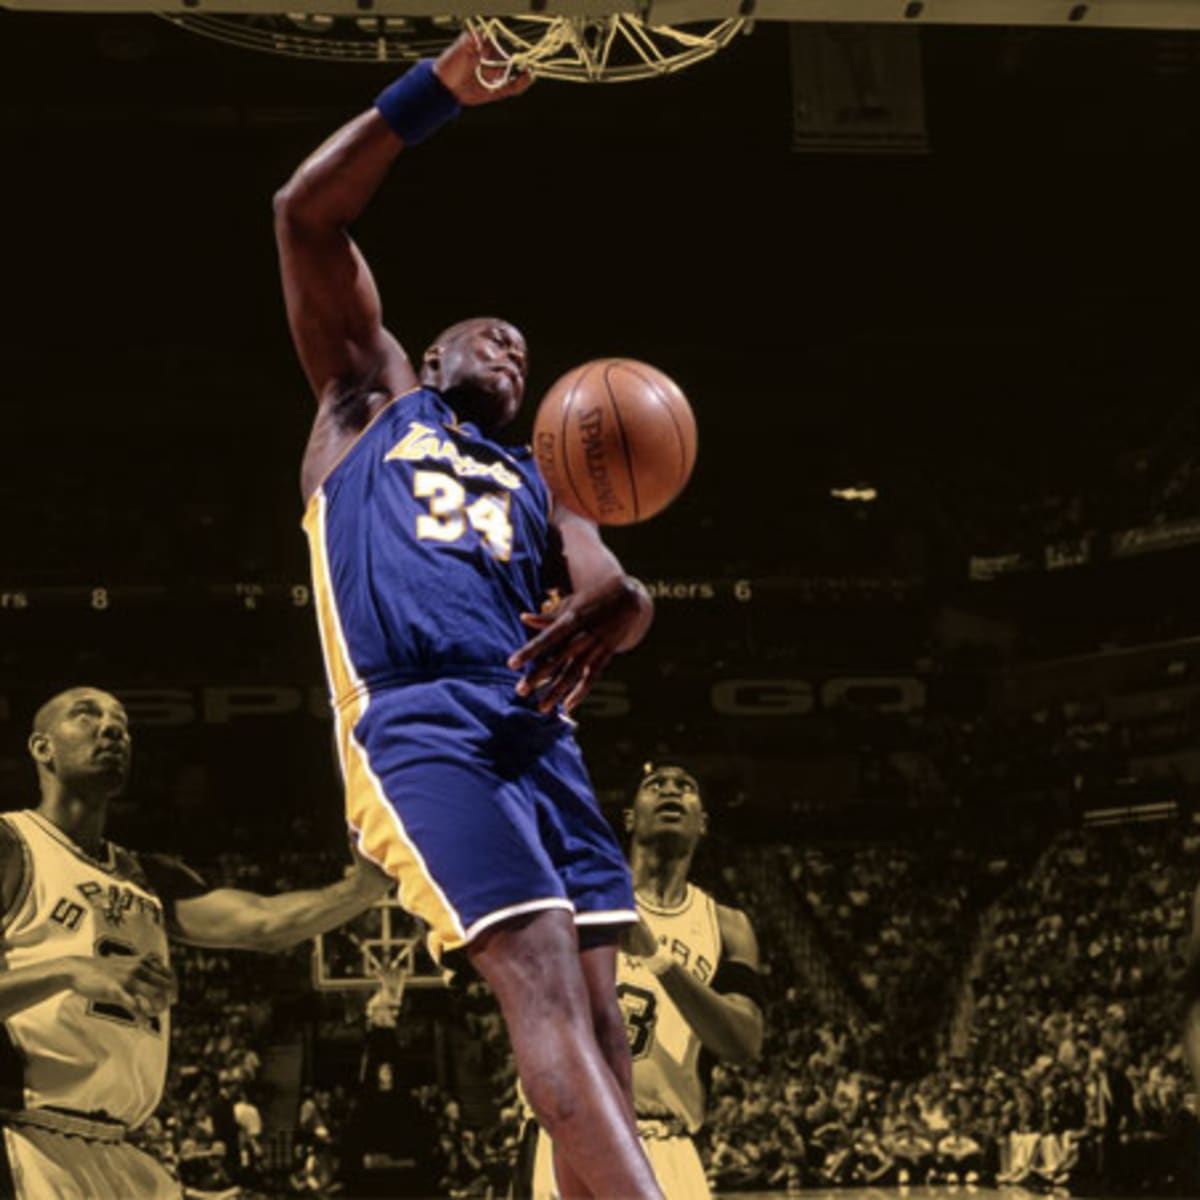 Shaq: A lot of the beef with Kobe 'was probably my fault